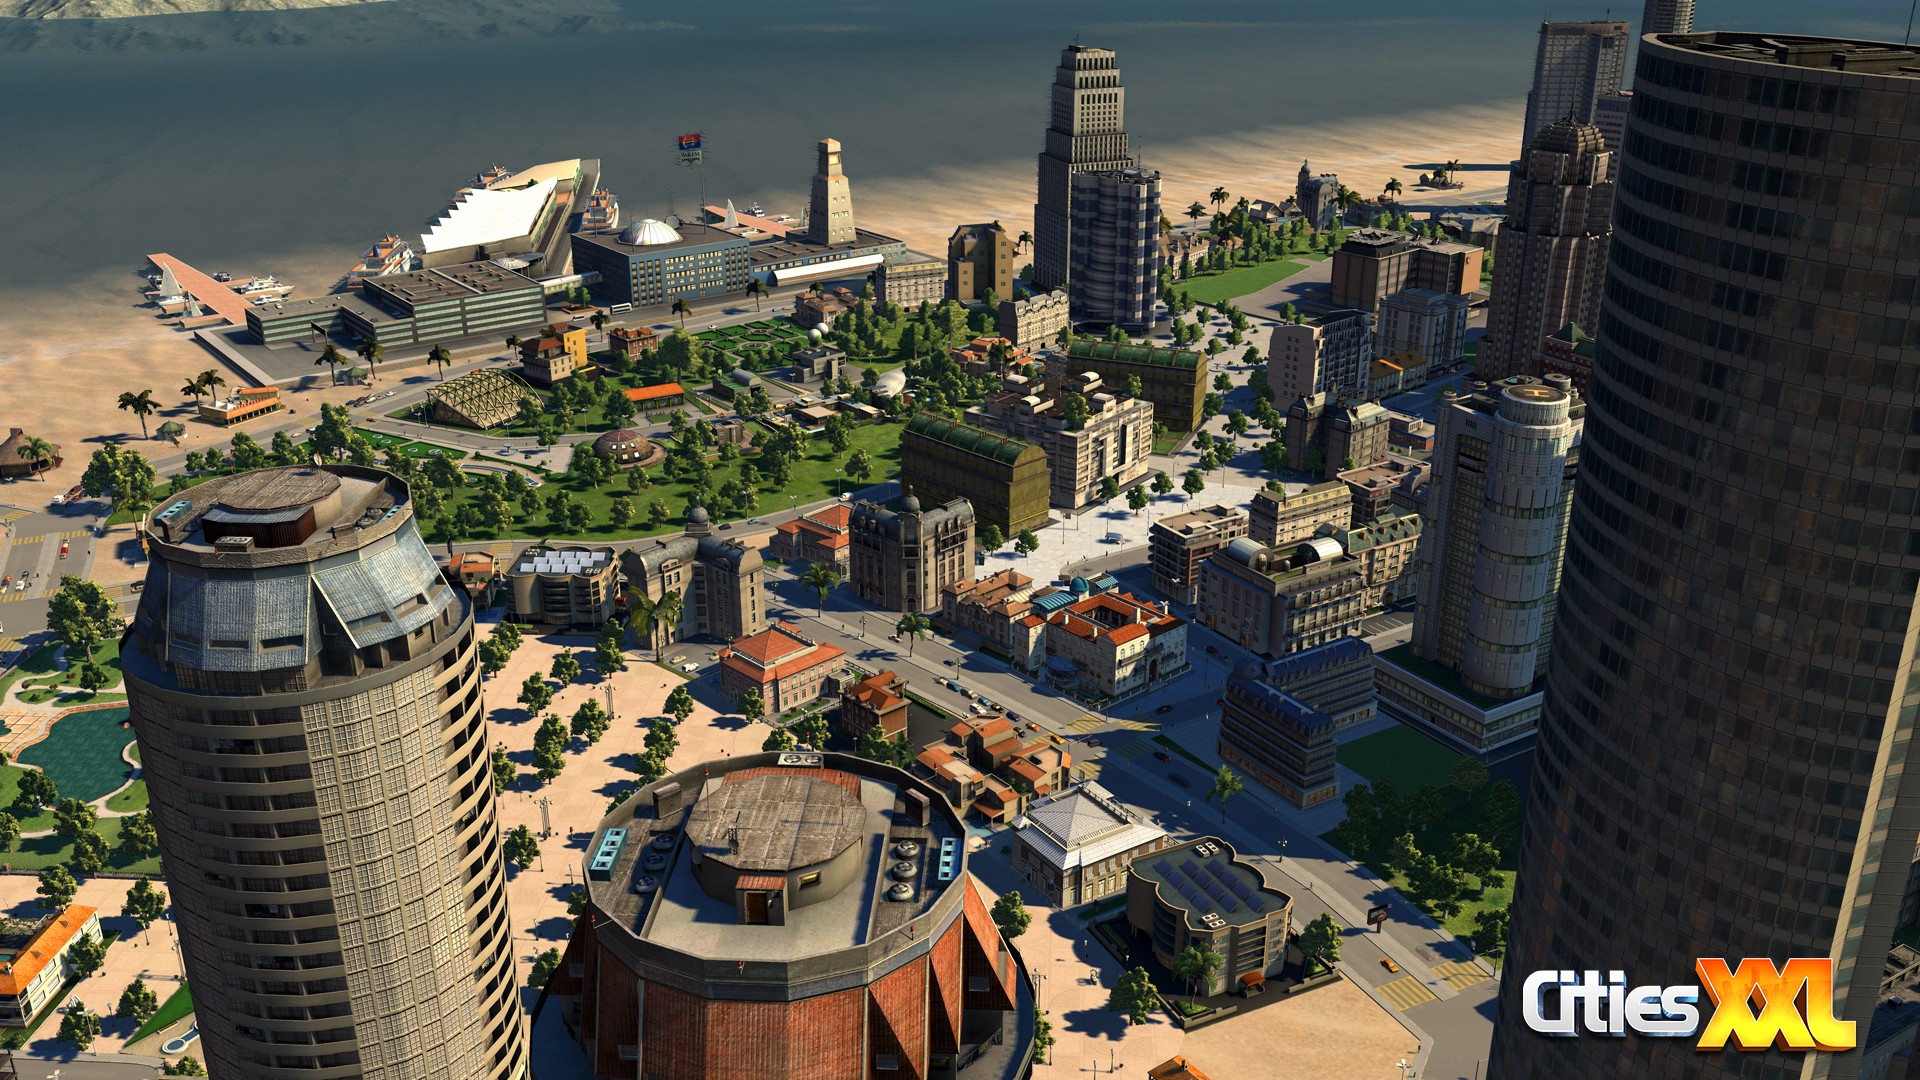 free download cities xl 2011 full version